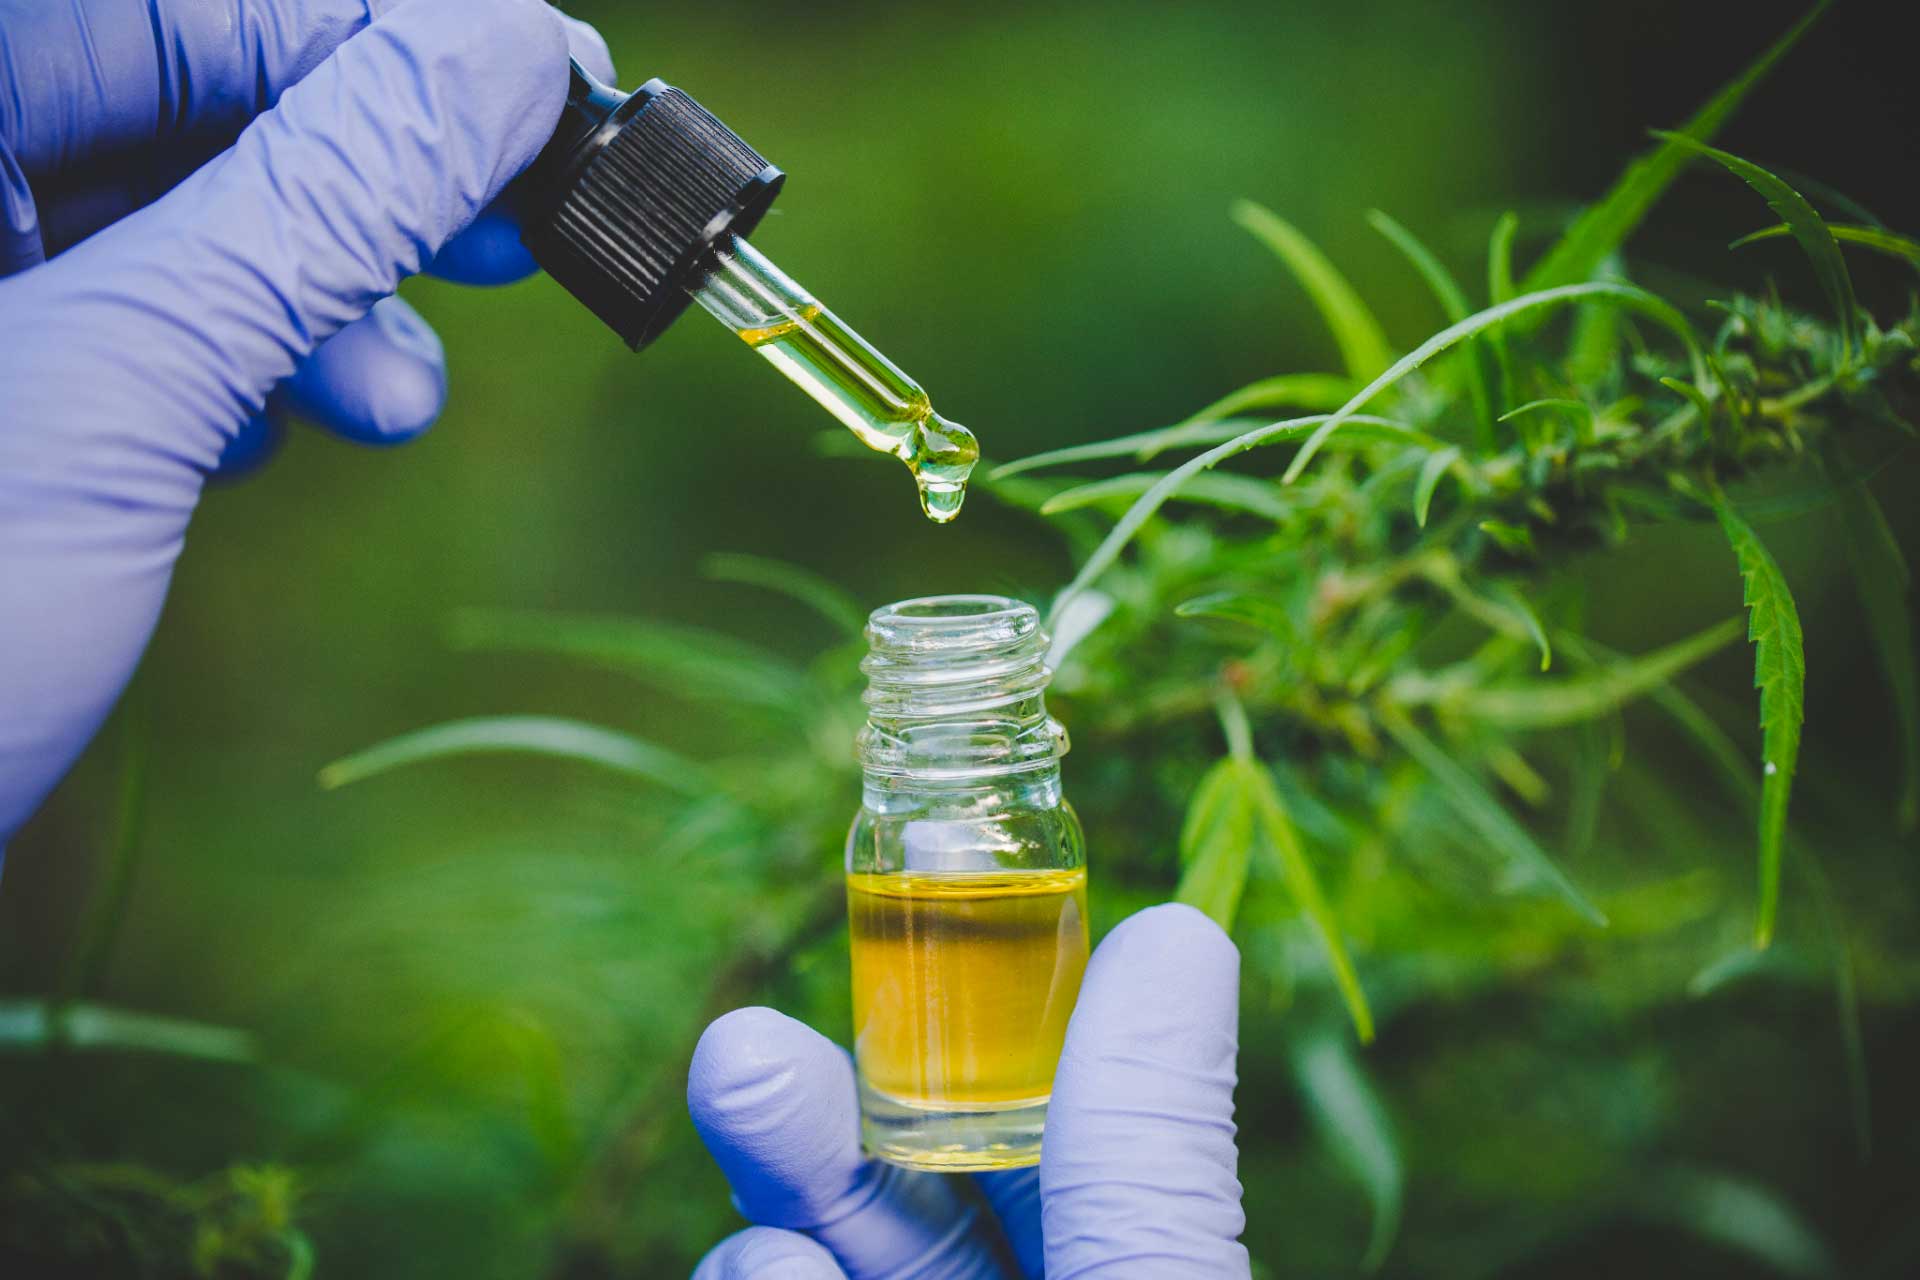 Gloved hands holding a vial of Delta-8 tincture oil in front of a hemp plant.